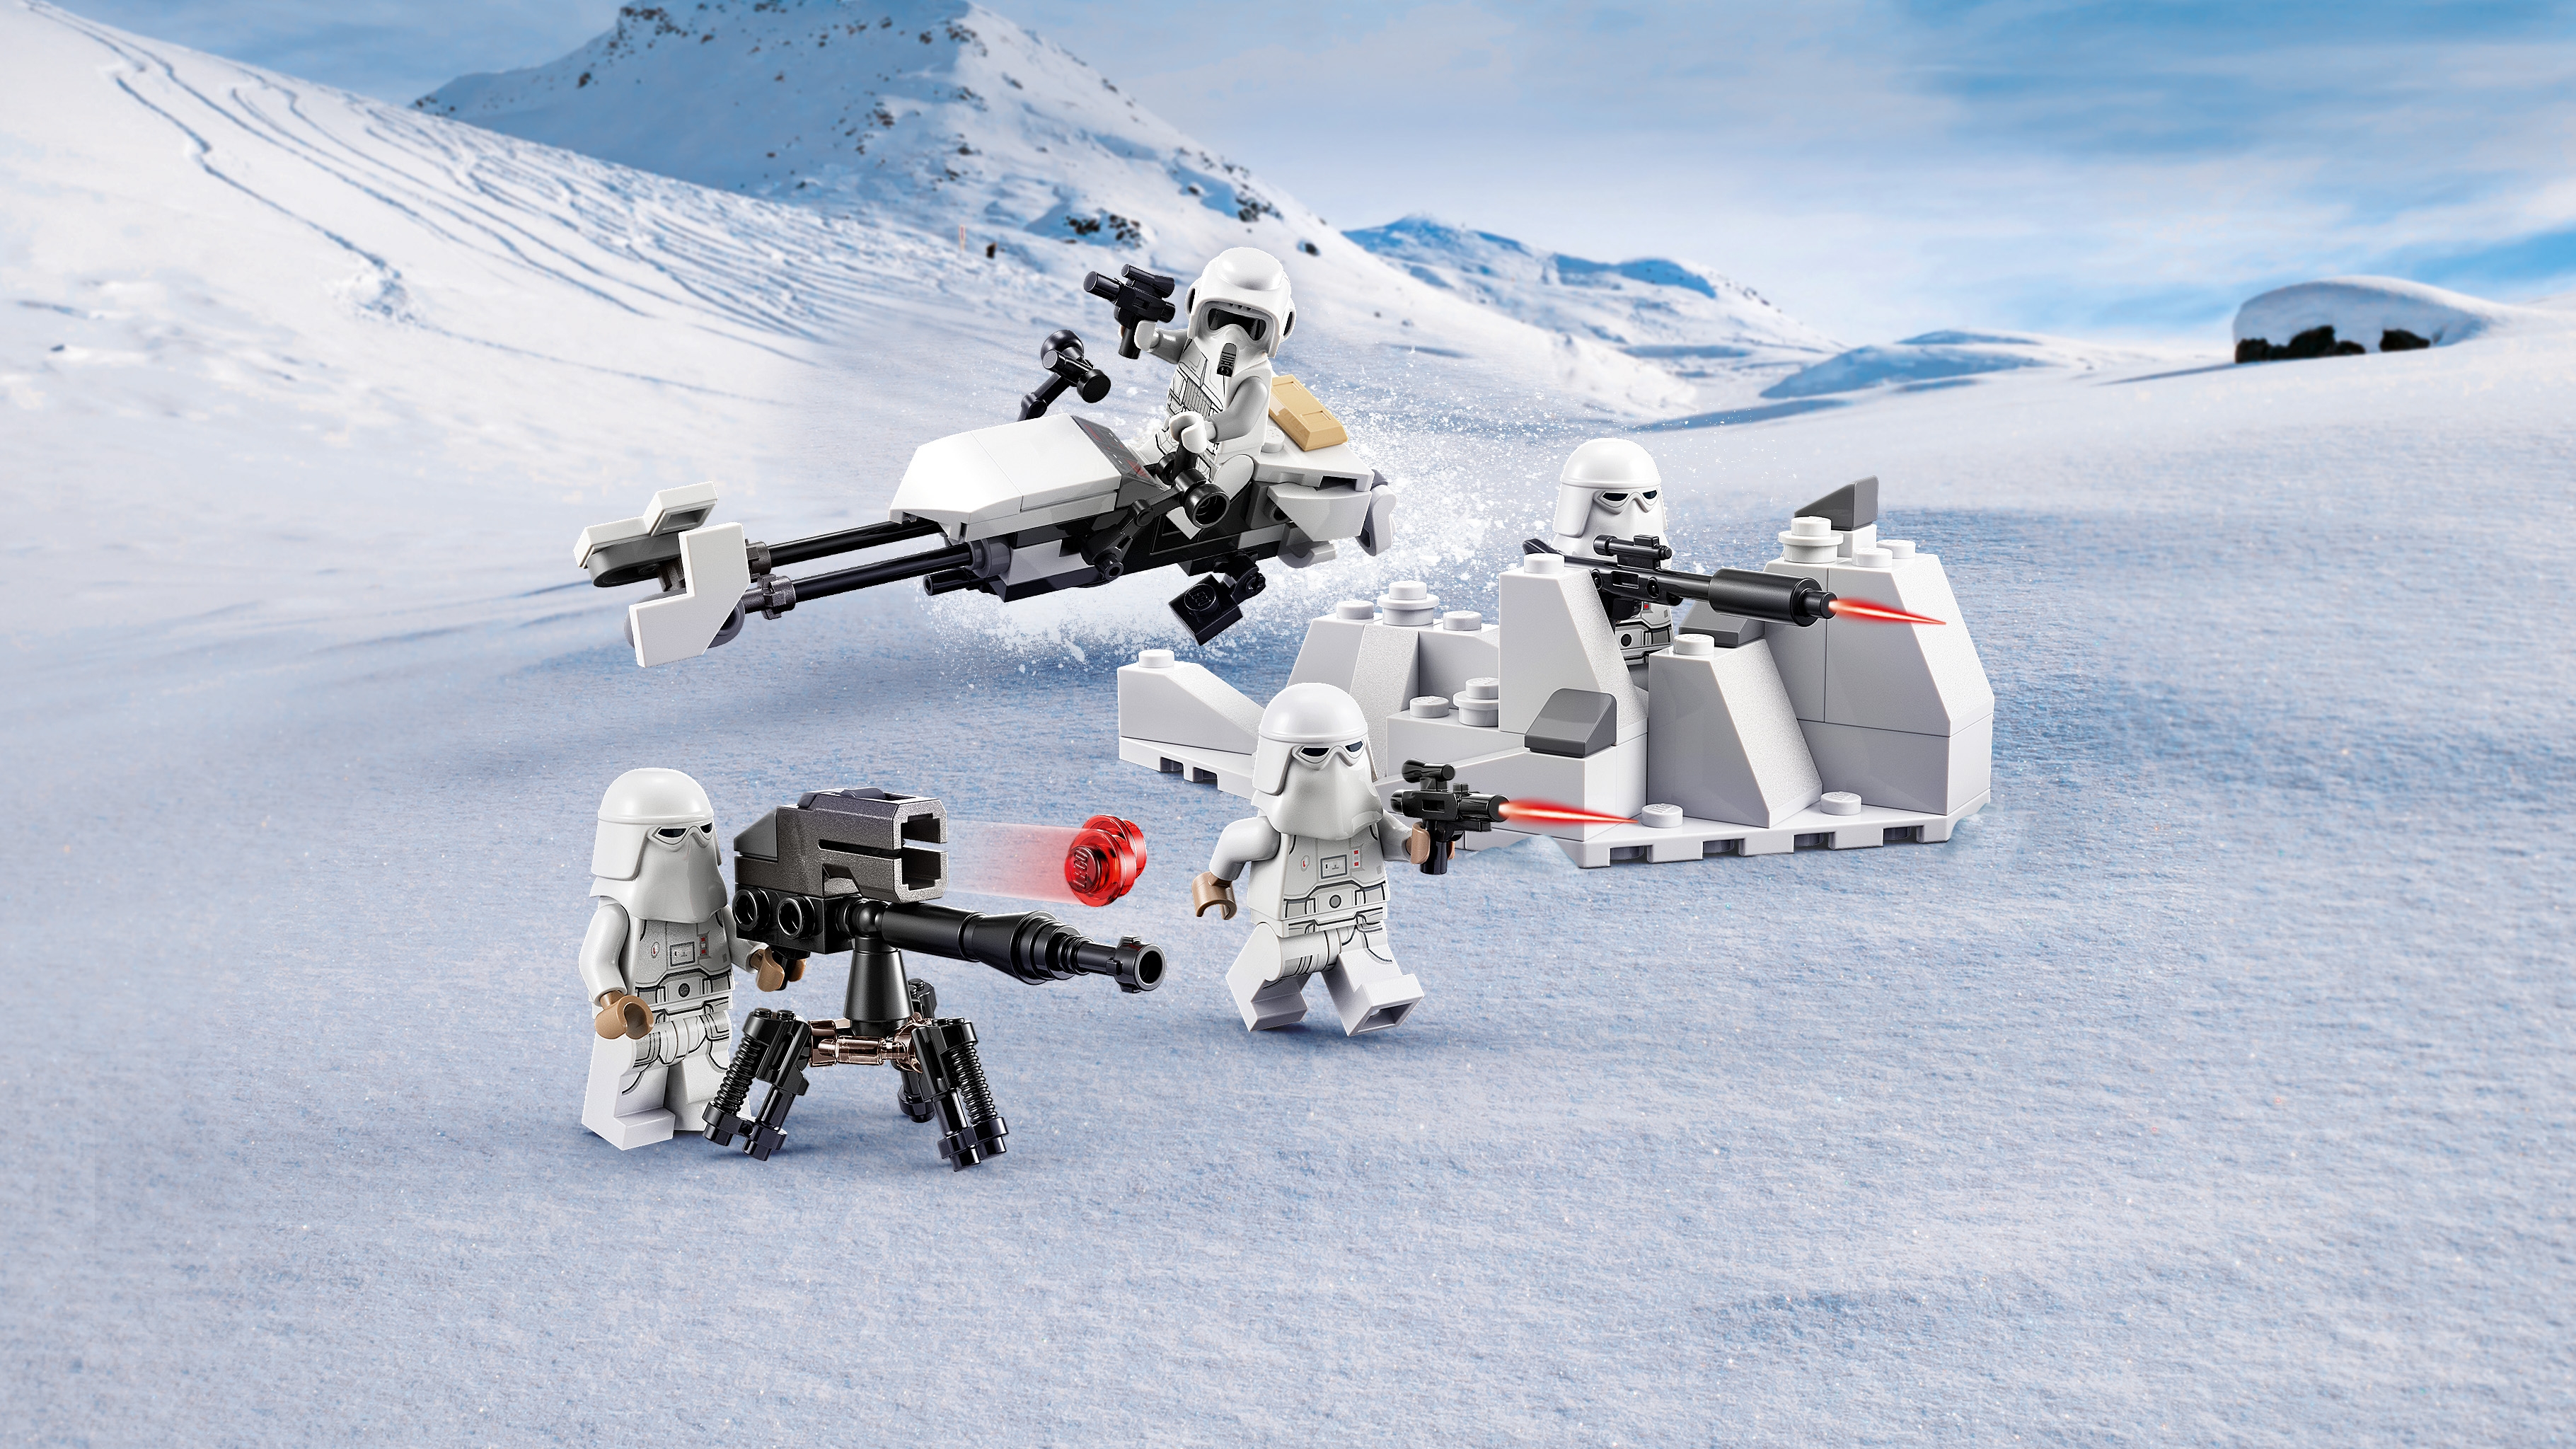 LEGO Hoth AT-ST review: Straight out of Empire Strikes Back - 9to5Toys